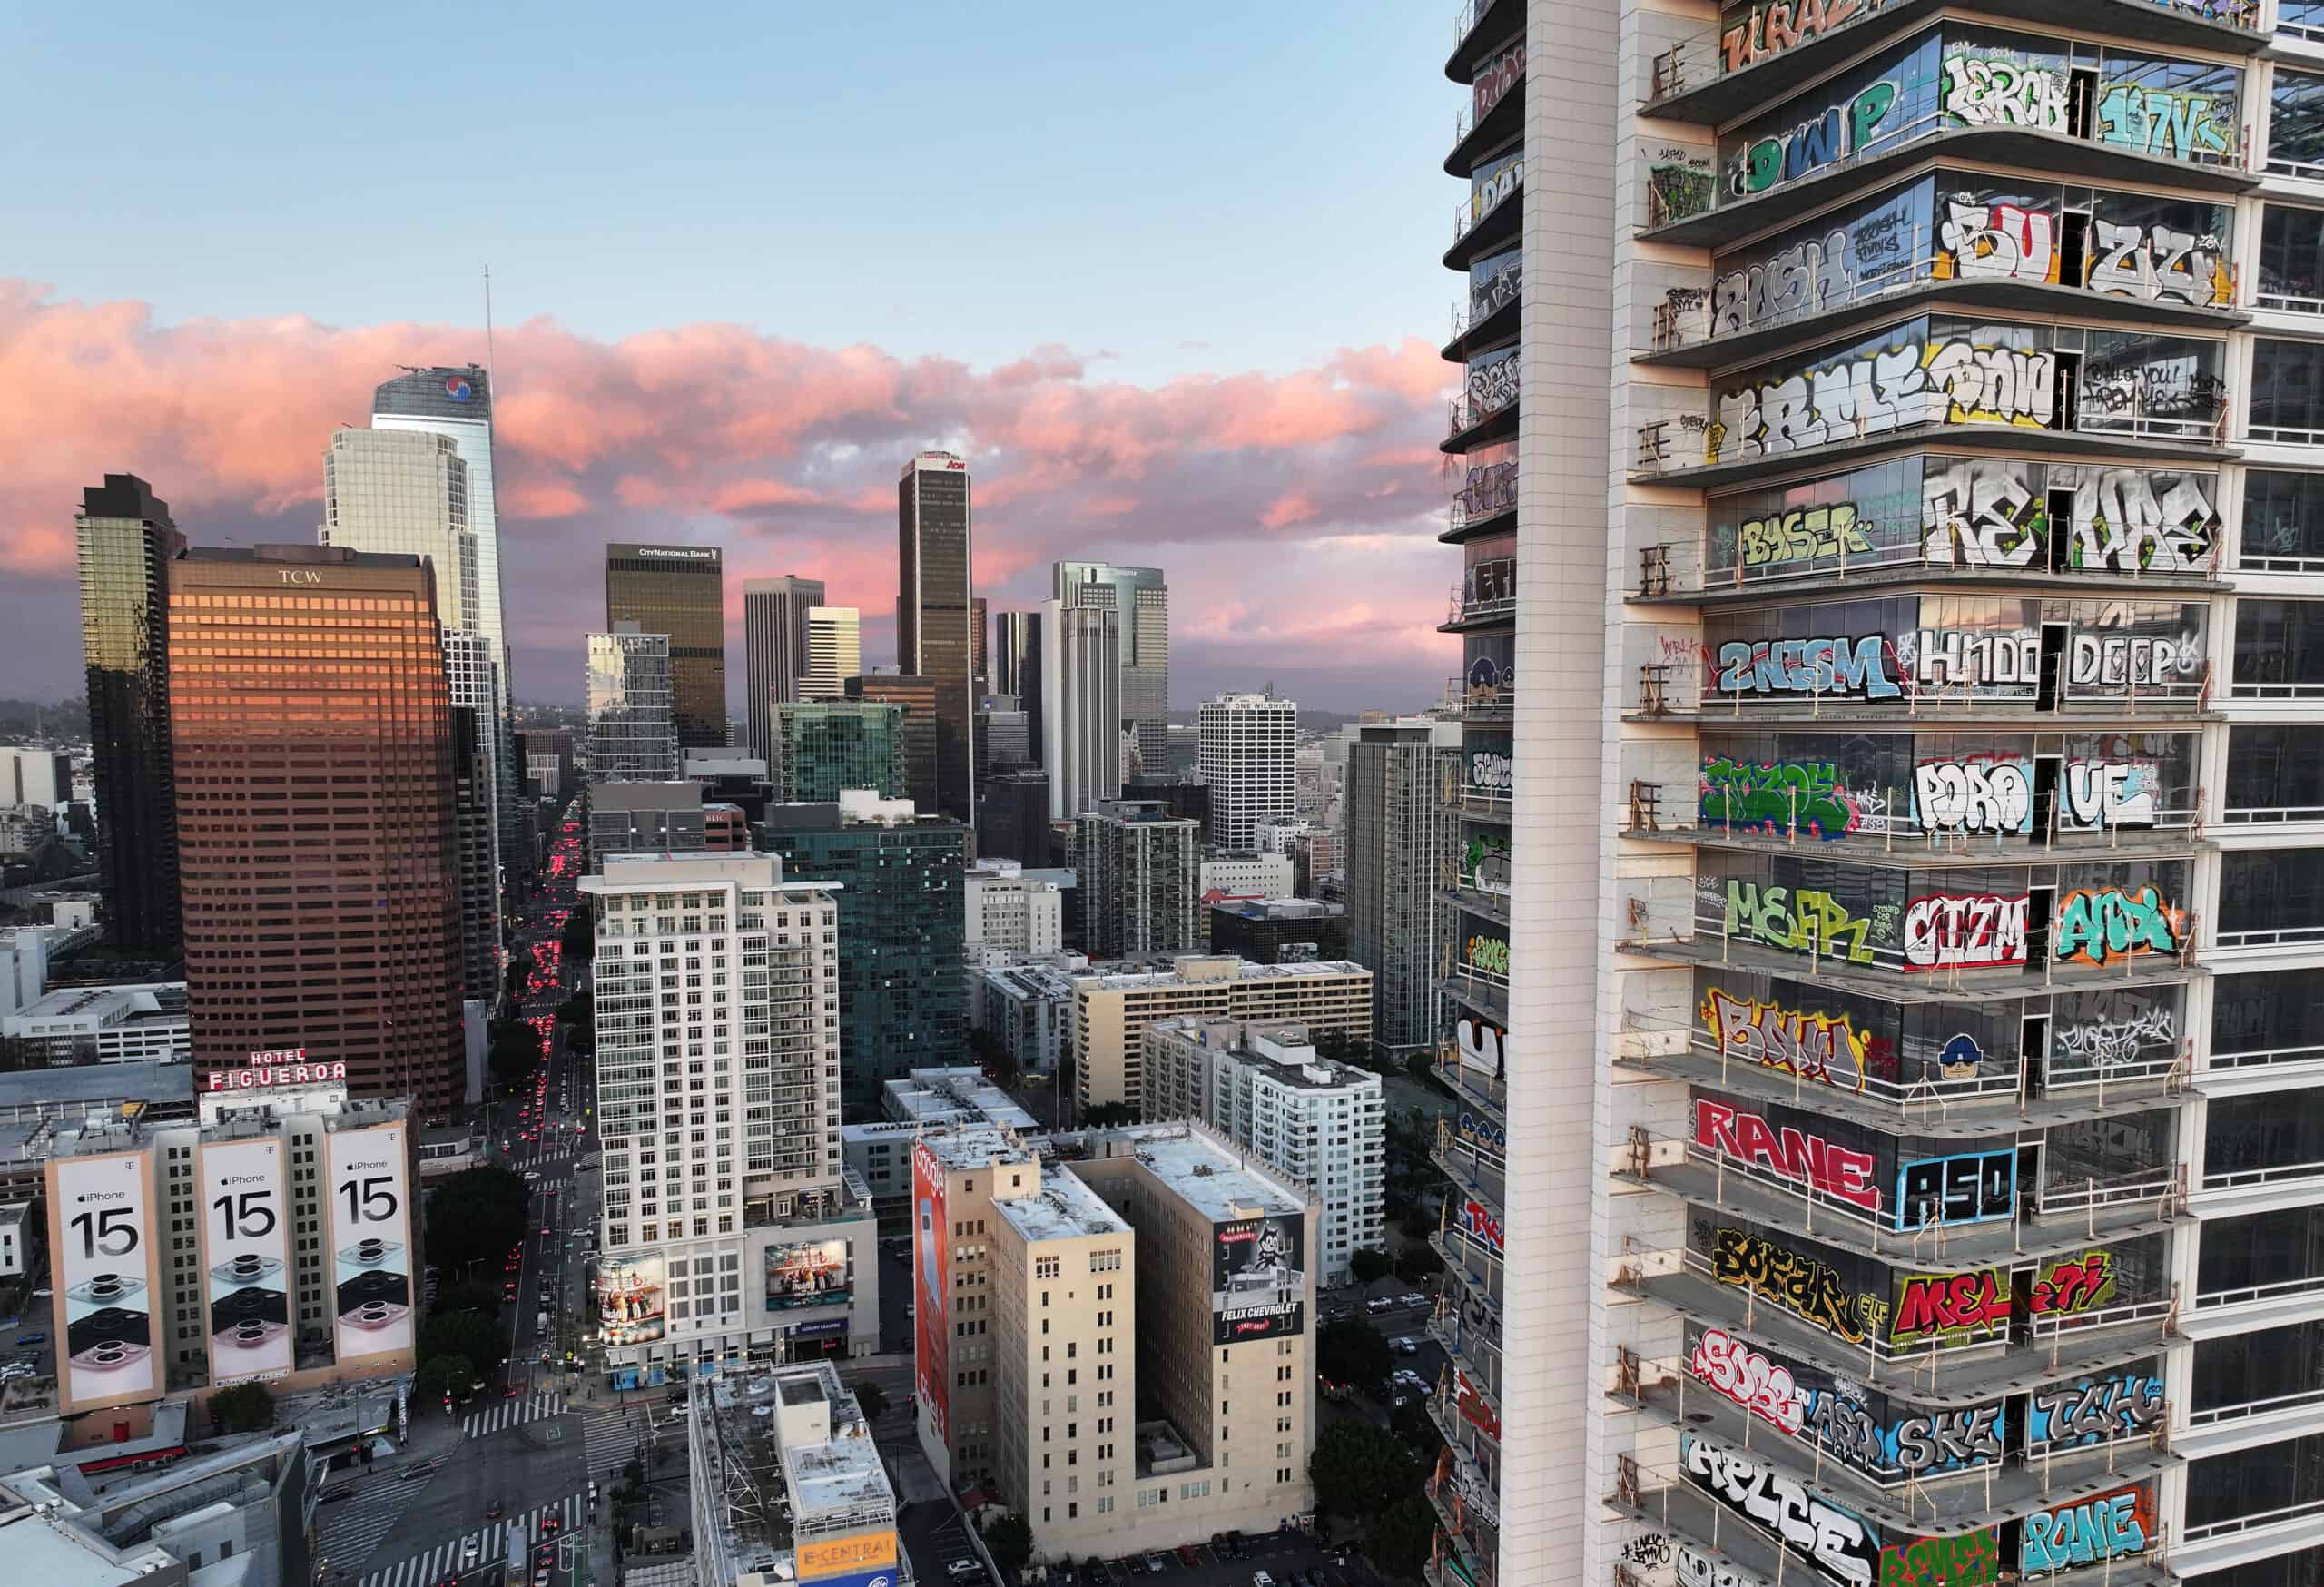 27 Floors Of Unfinished L.A. Luxury Skyscraper Tagged With Graffiti